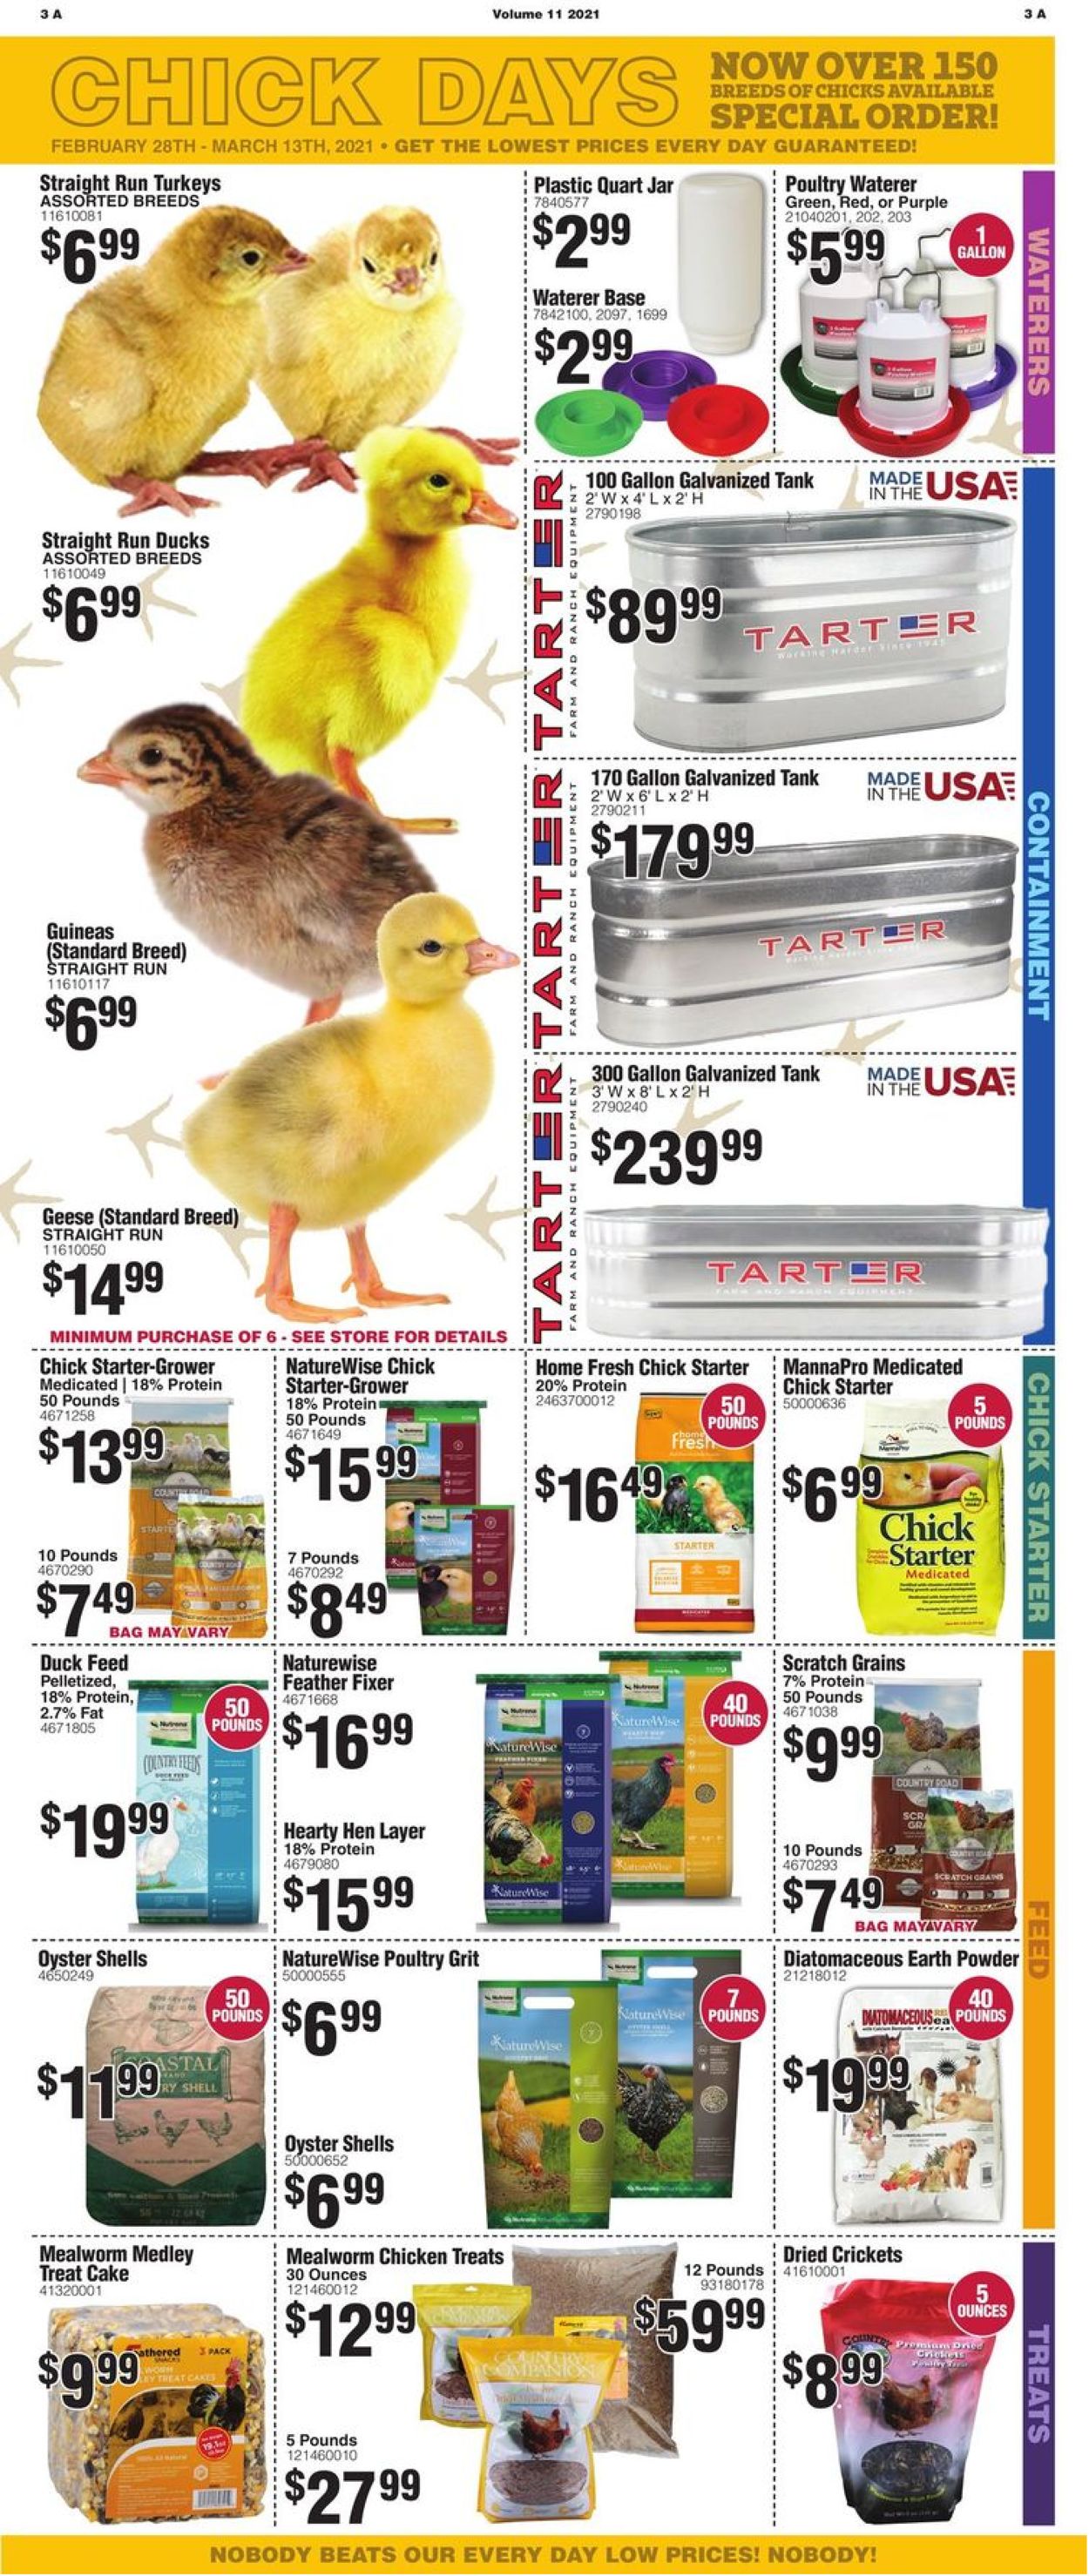 Rural King Current weekly ad 02/28 03/13/2021 [4]